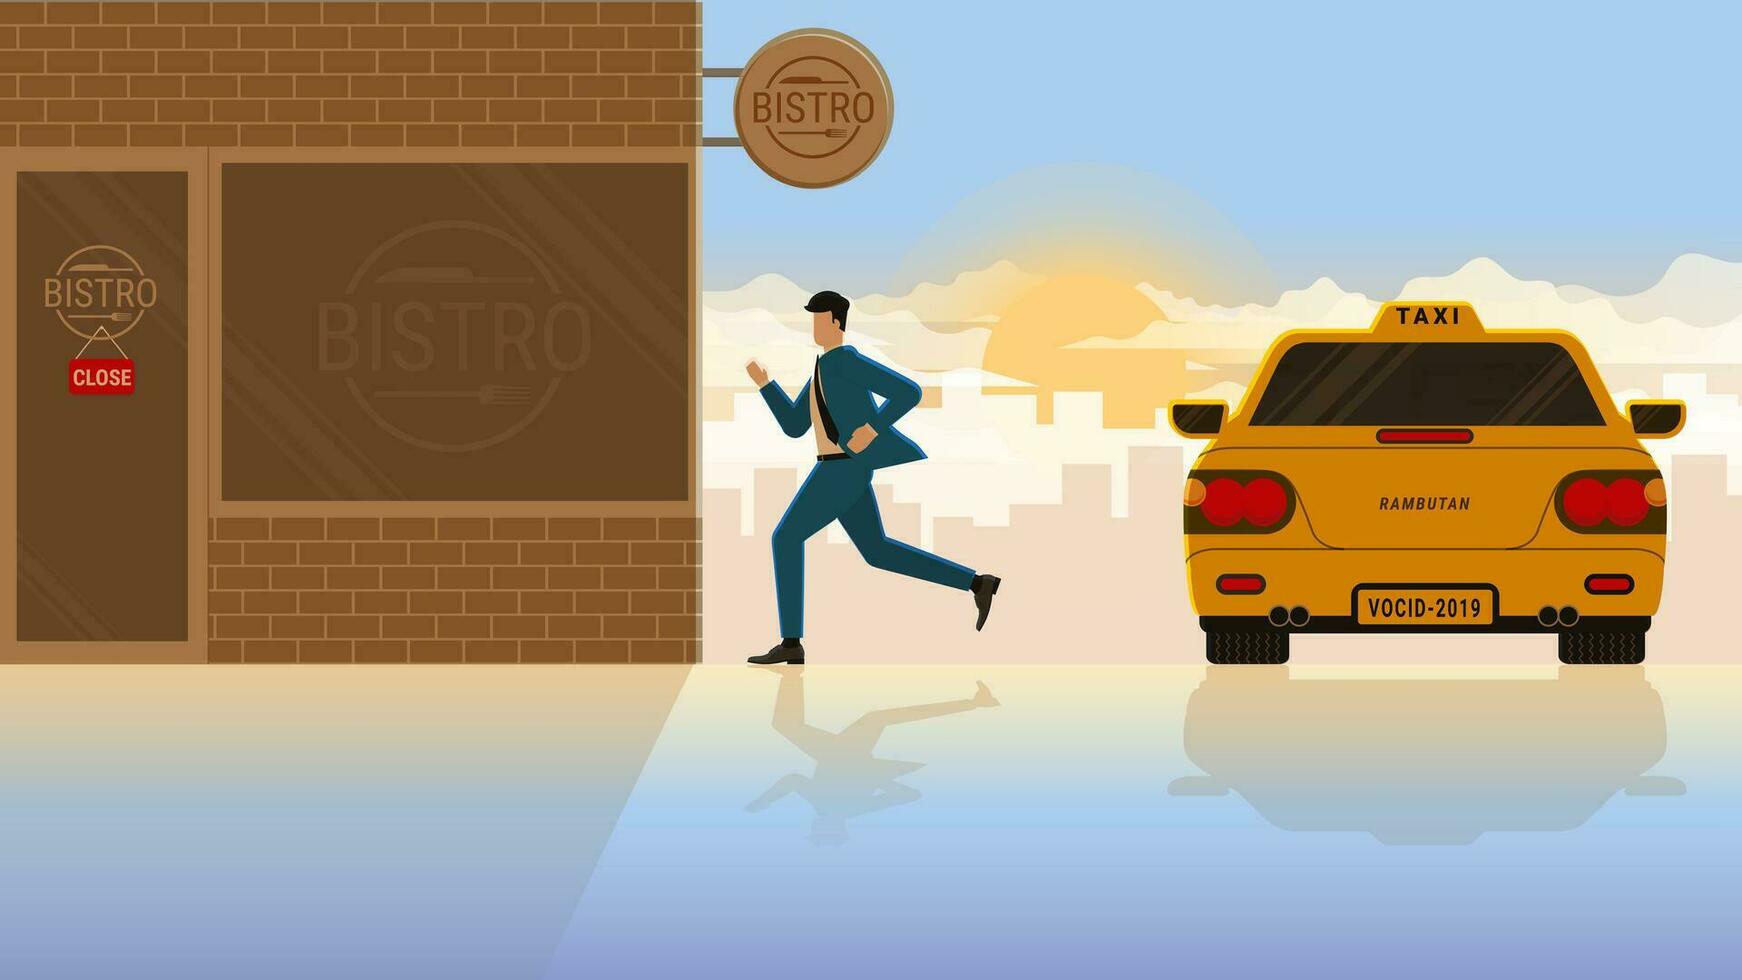 Businessman run from taxi transport to close bistro restaurant in early morning sunrise vector